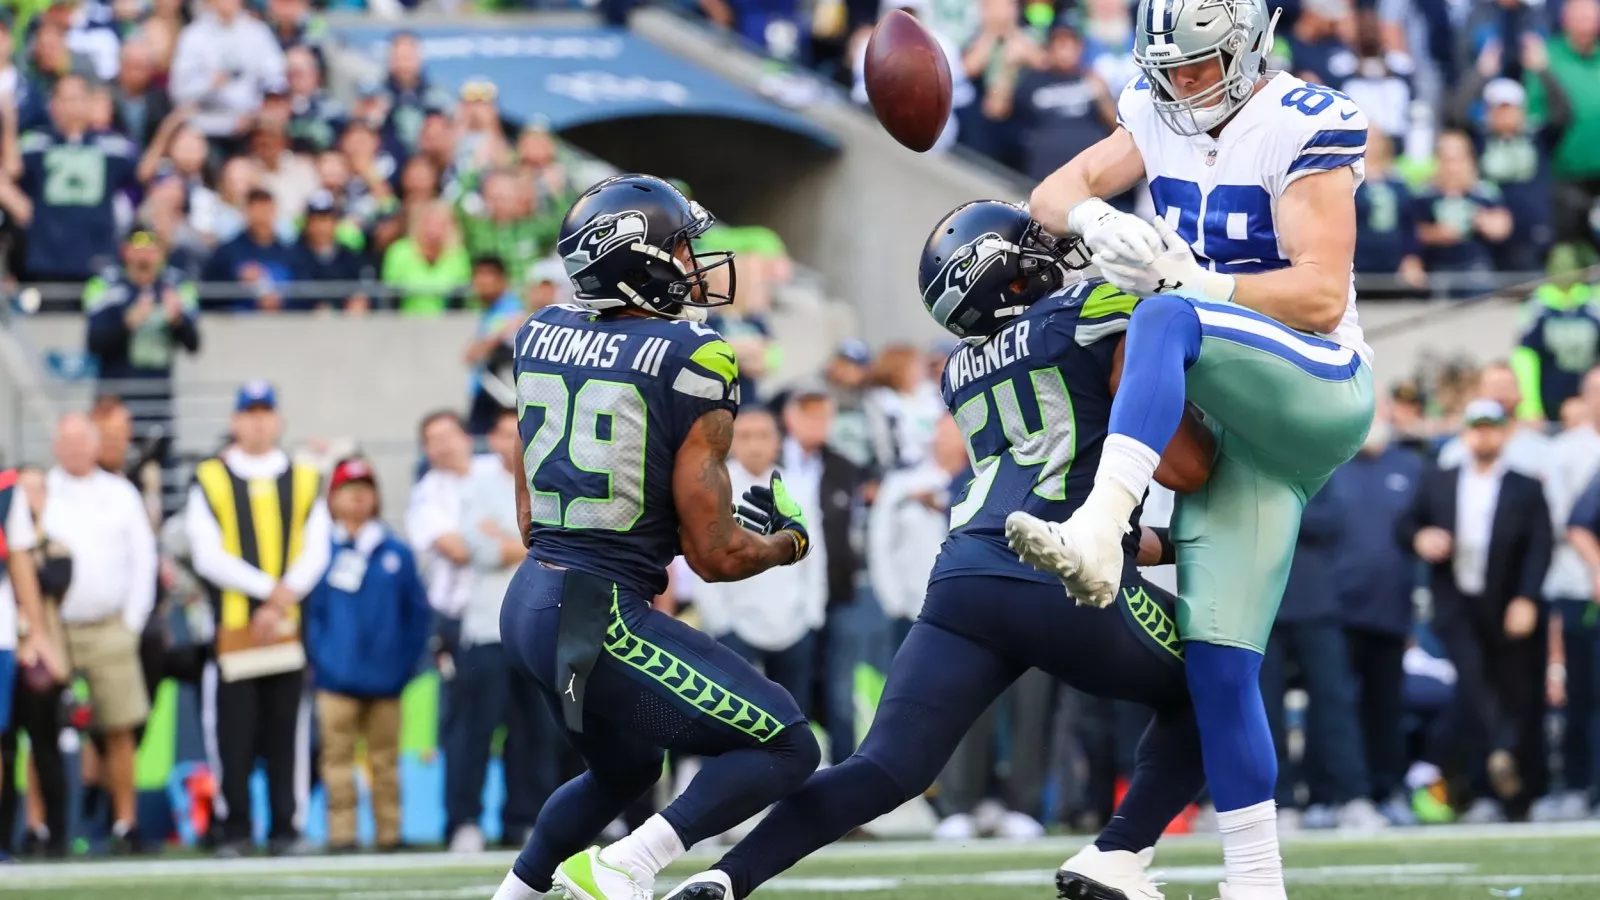 NFL Playoffs: How to Watch, Live Stream the Seattle Seahawks vs